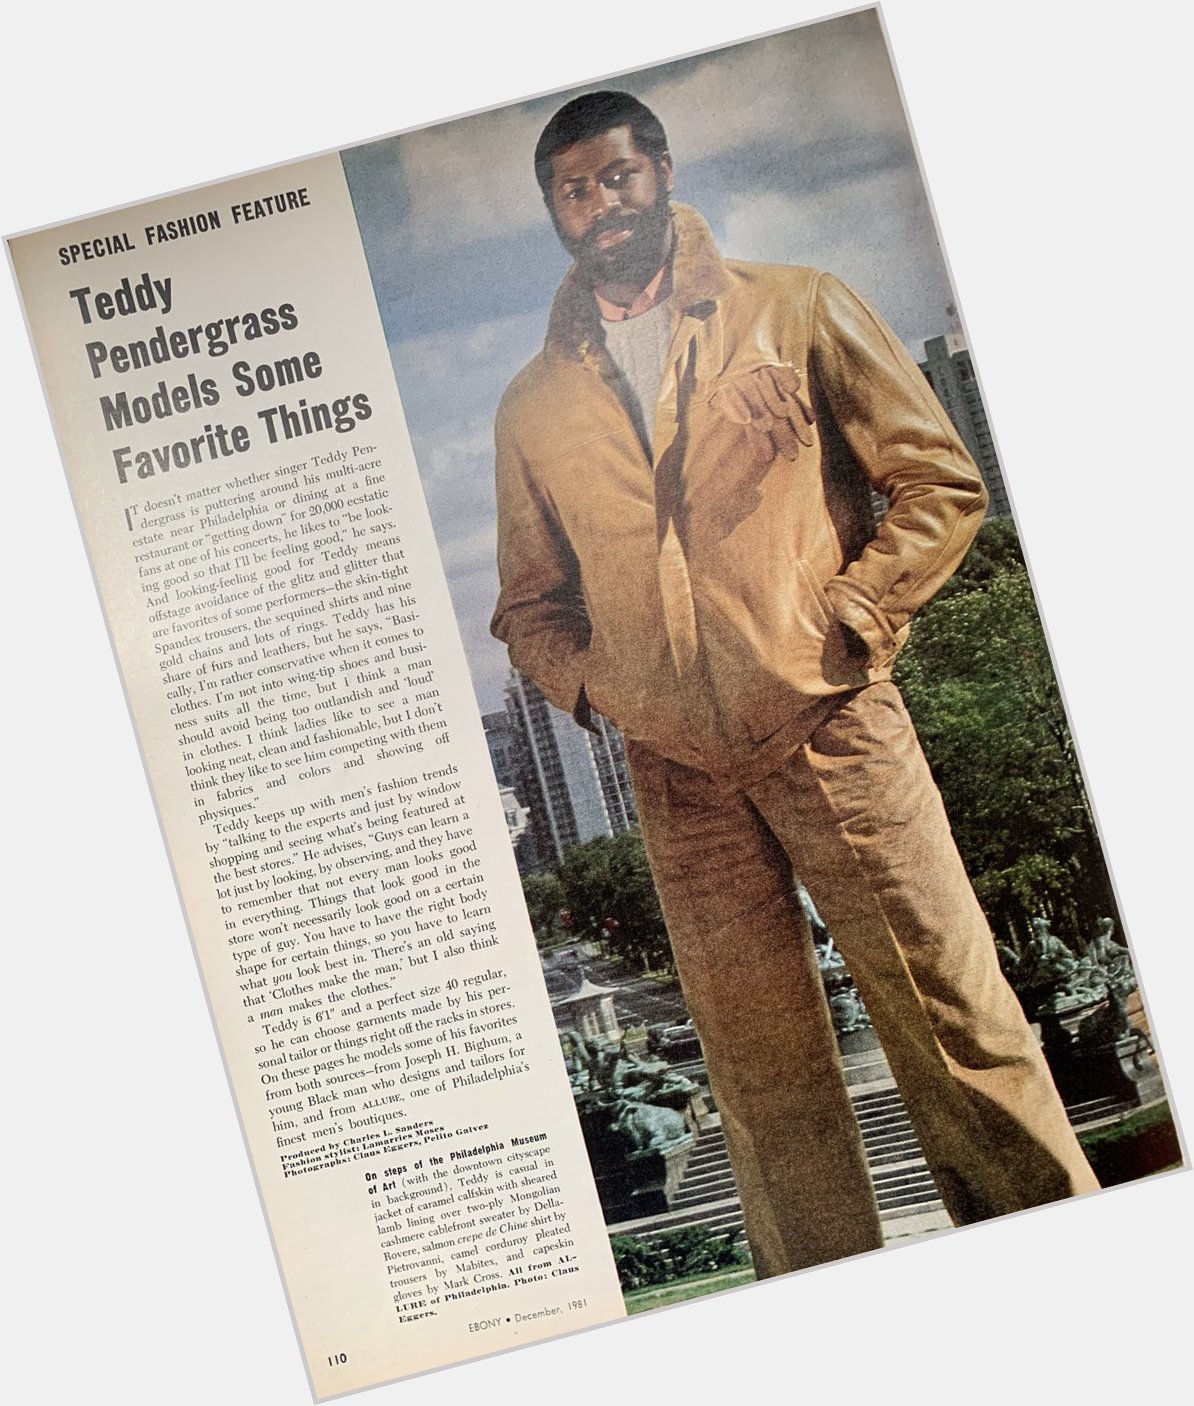 April 1973. Found this feature. Happy Birthday Teddy Pendergrass  . 